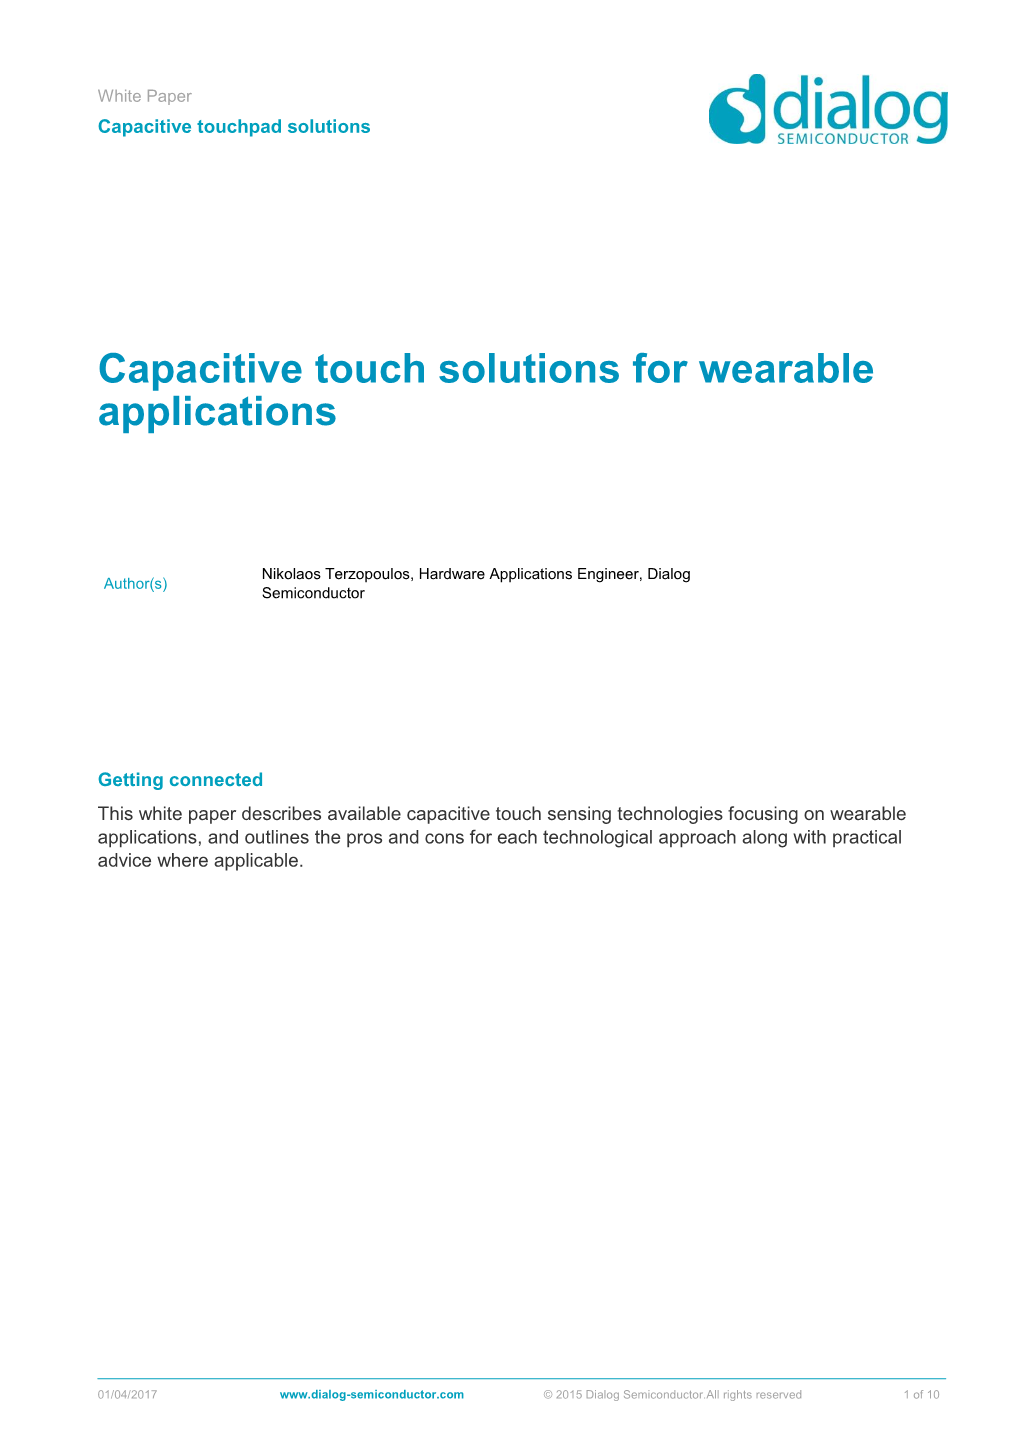 White Paper Capacitive Touch Solutions for Wearable Applications